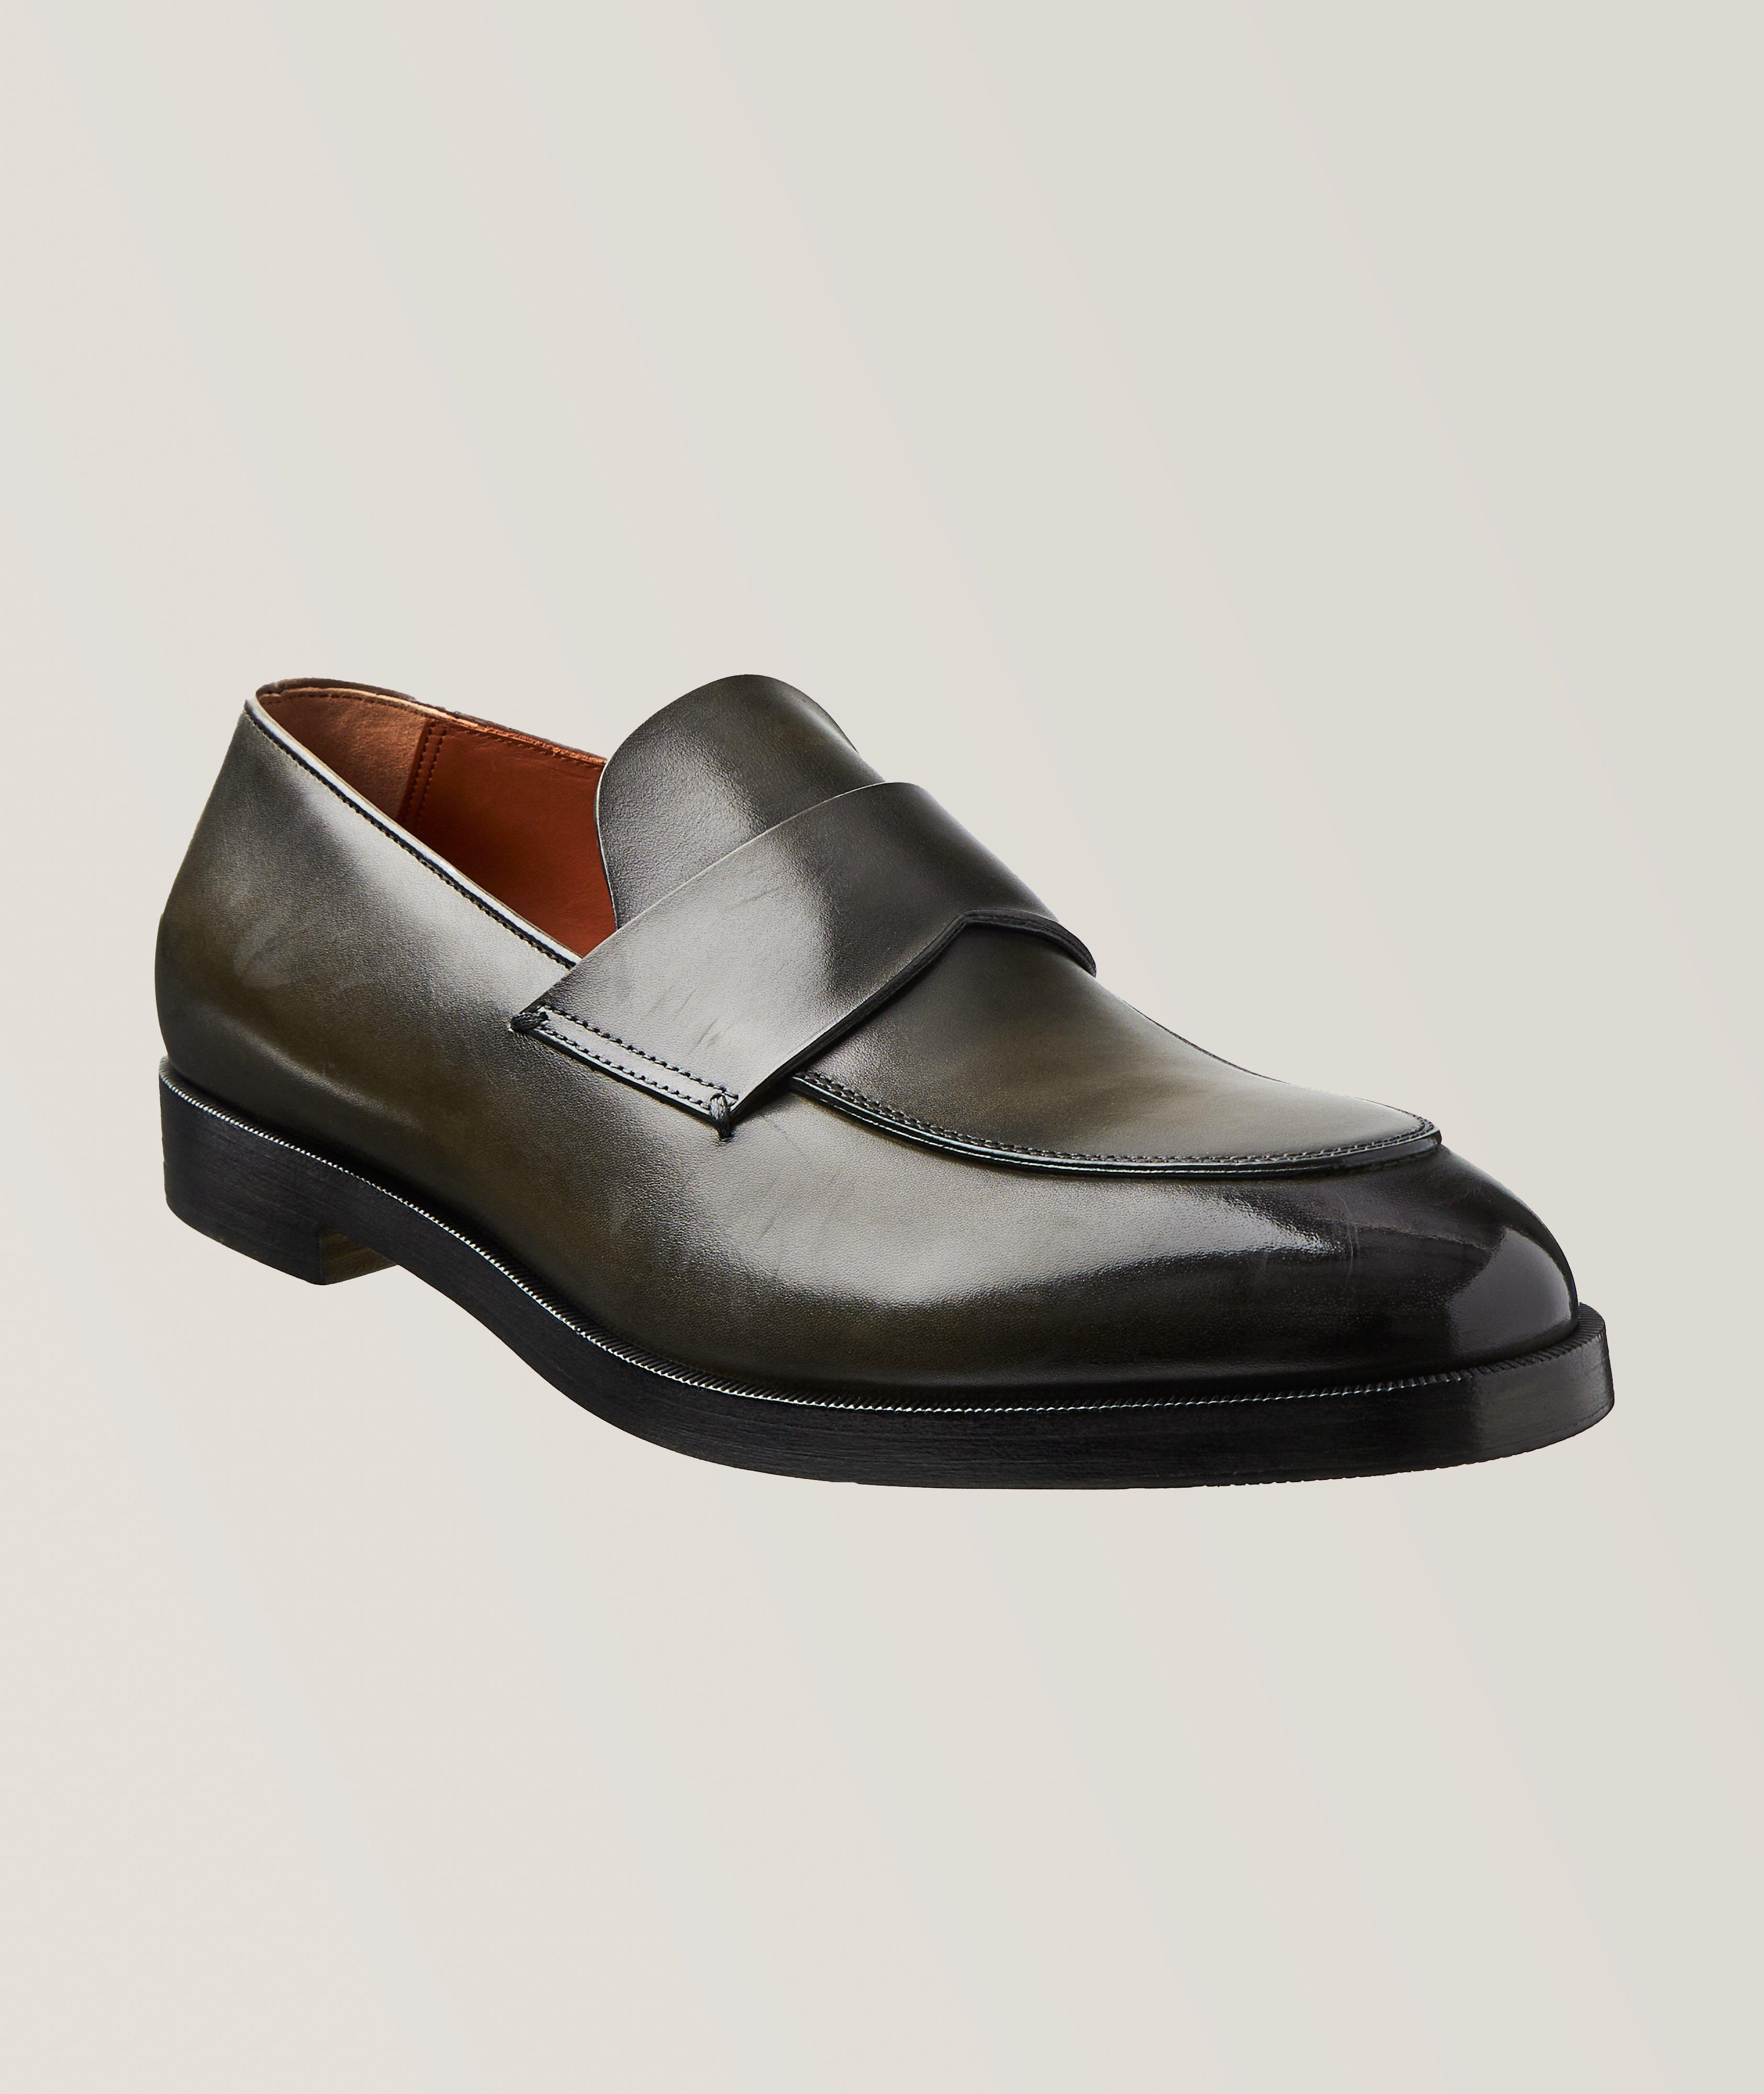 Torino Burnished Leather Banded Loafers image 0